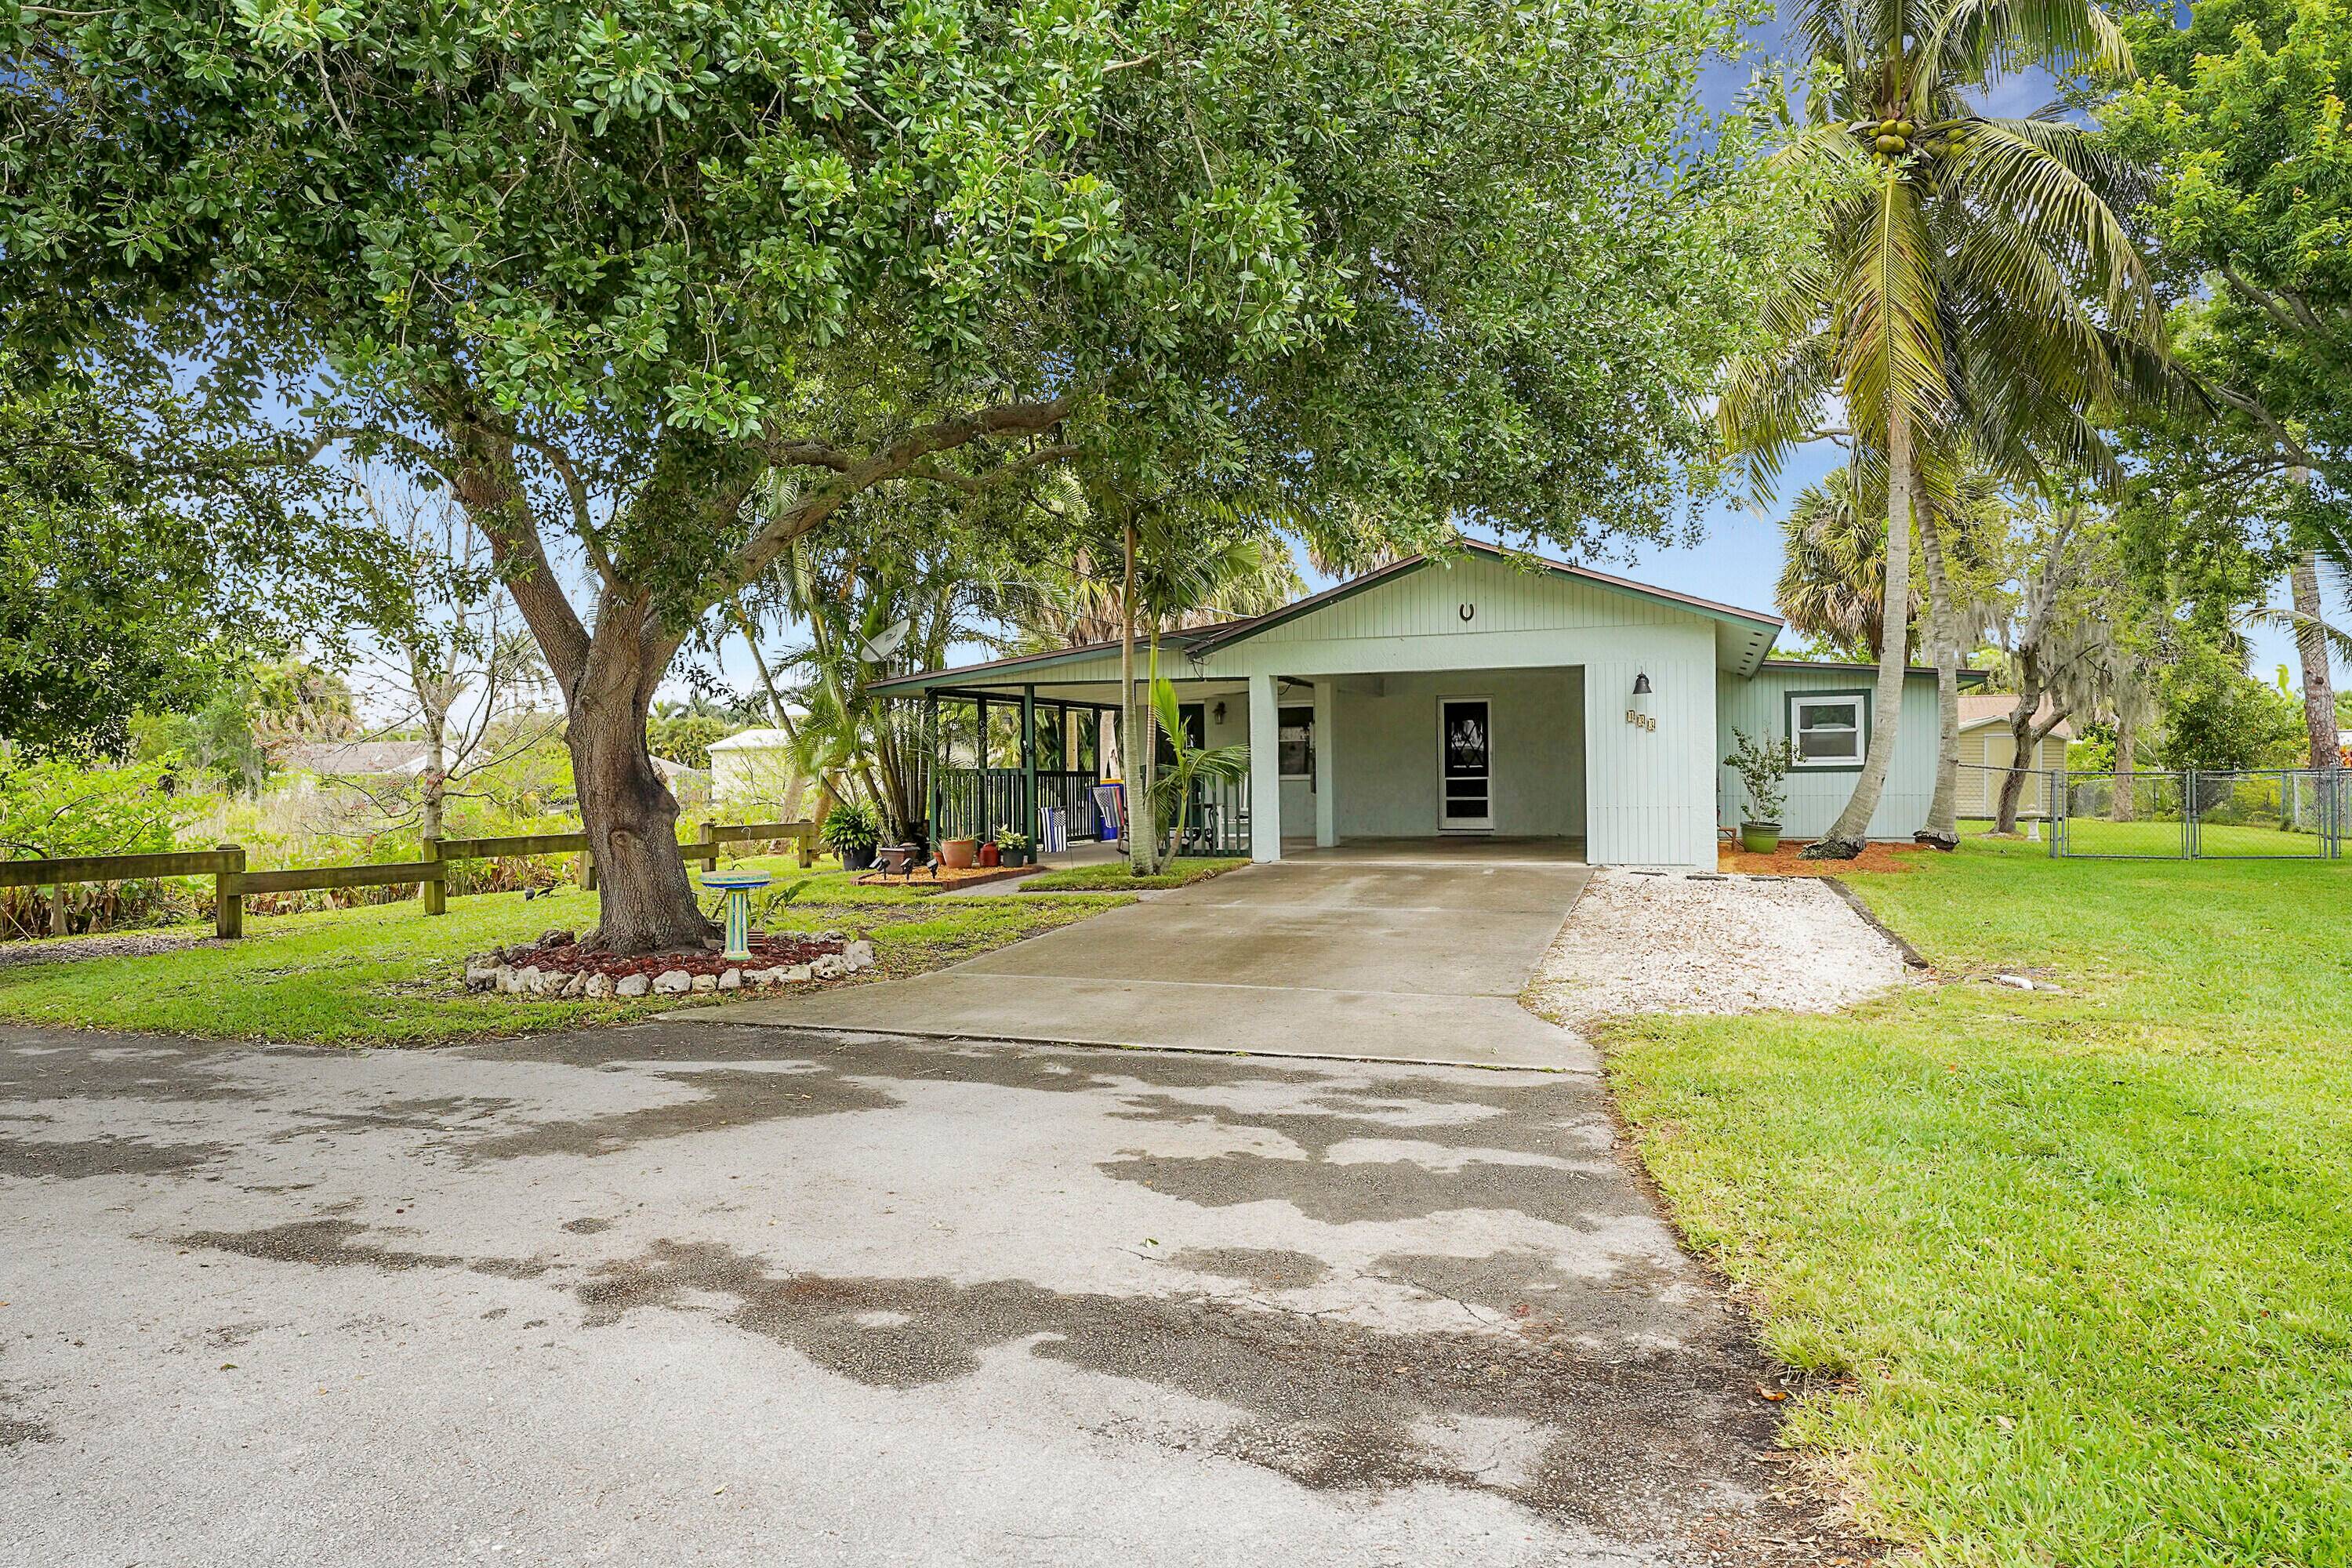 Escape to your own slice of paradise in this charming 3 bedroom, 2 bathroom home nestled in the serene surroundings of Palm City.